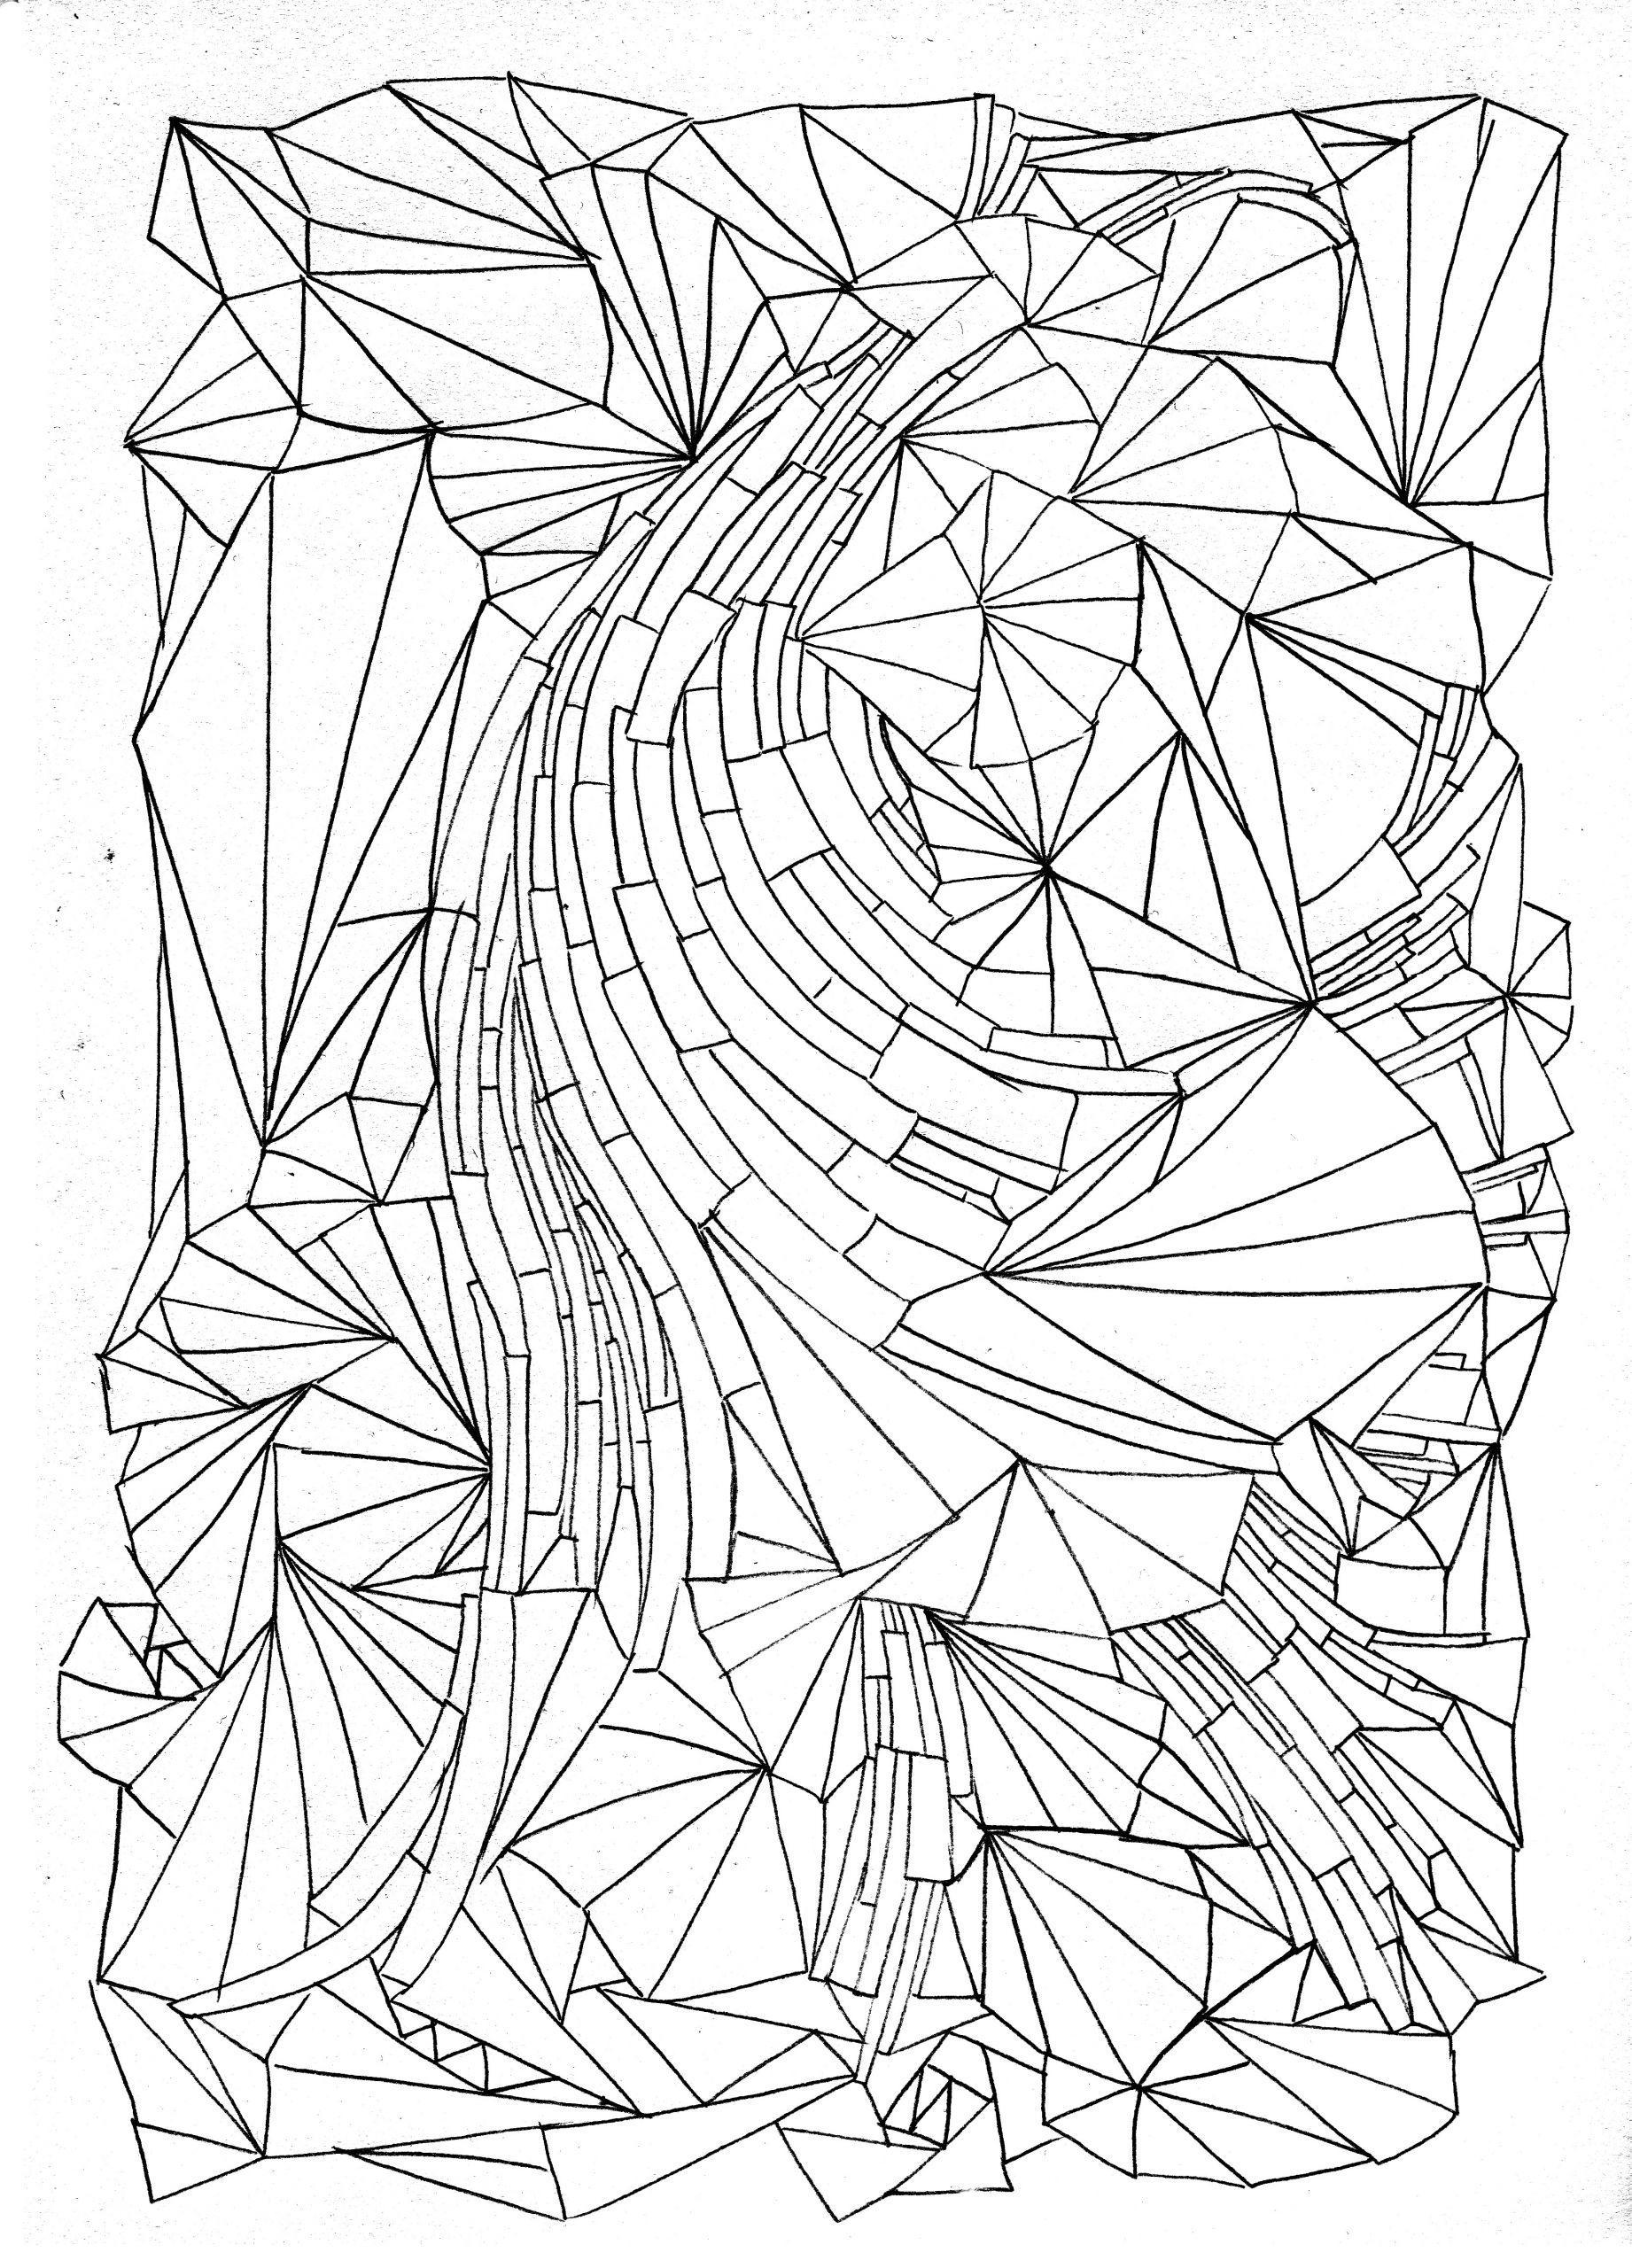 Coloring Pages For Adults Patterns
 Colouring designs – thelinoprinter